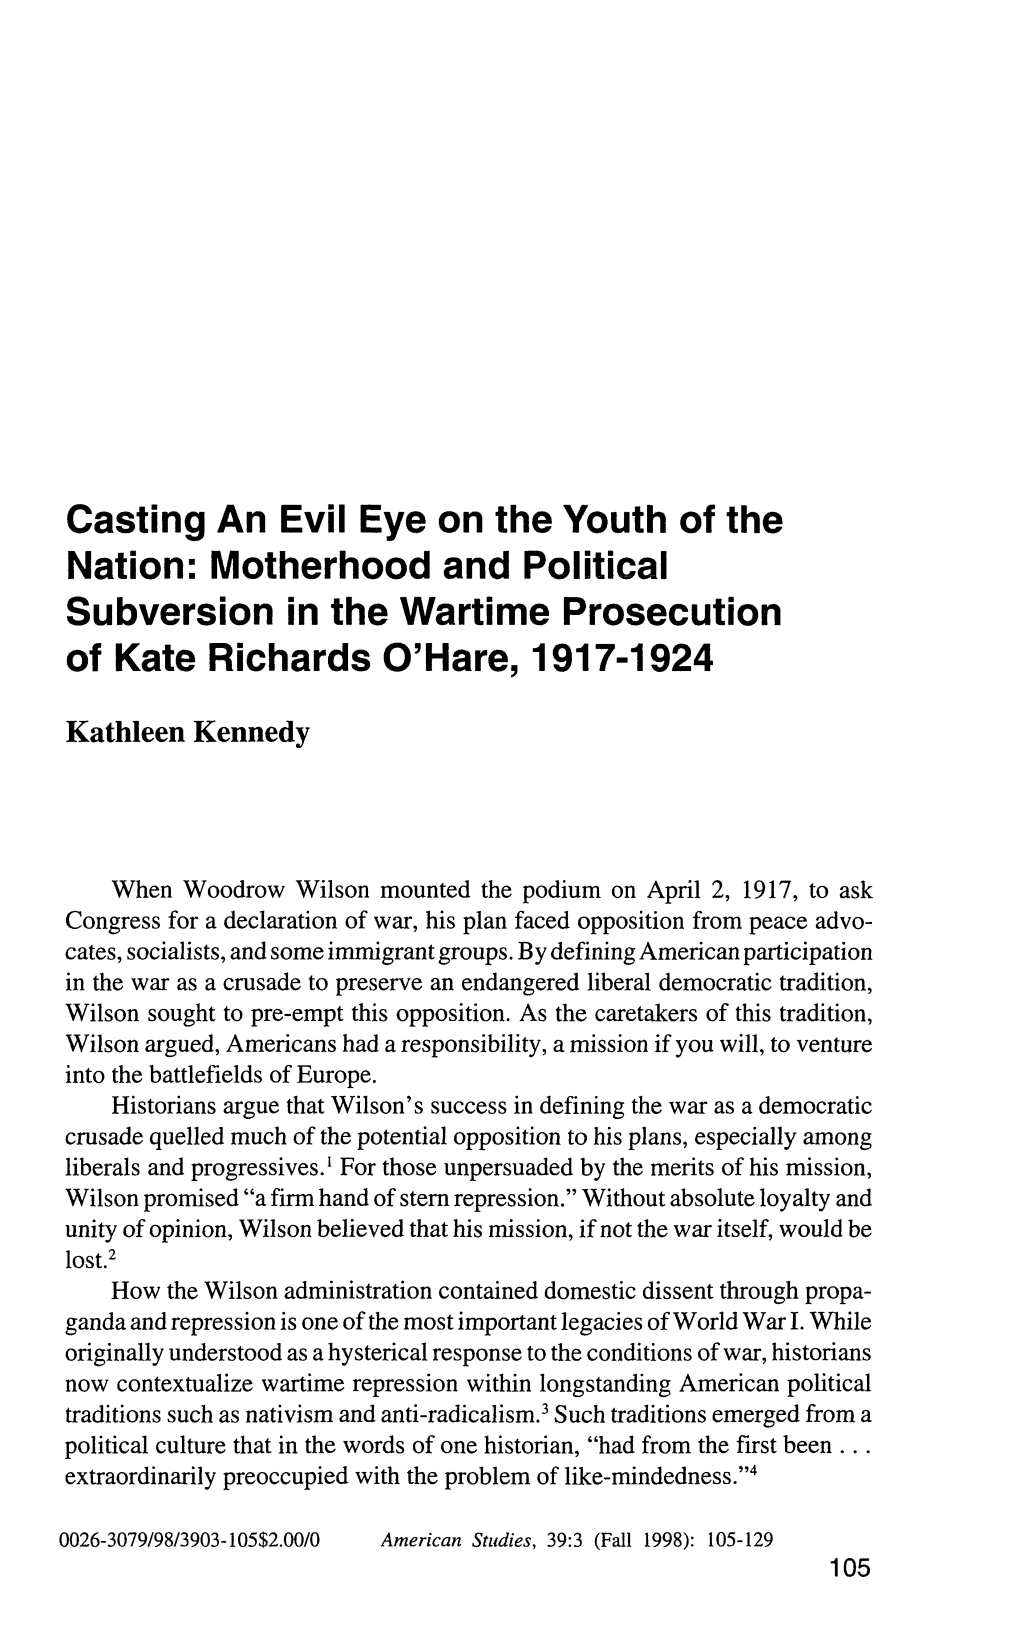 Motherhood and Political Subversion in the Wartime Prosecution of Kate Richards O'hare, 1917-1924